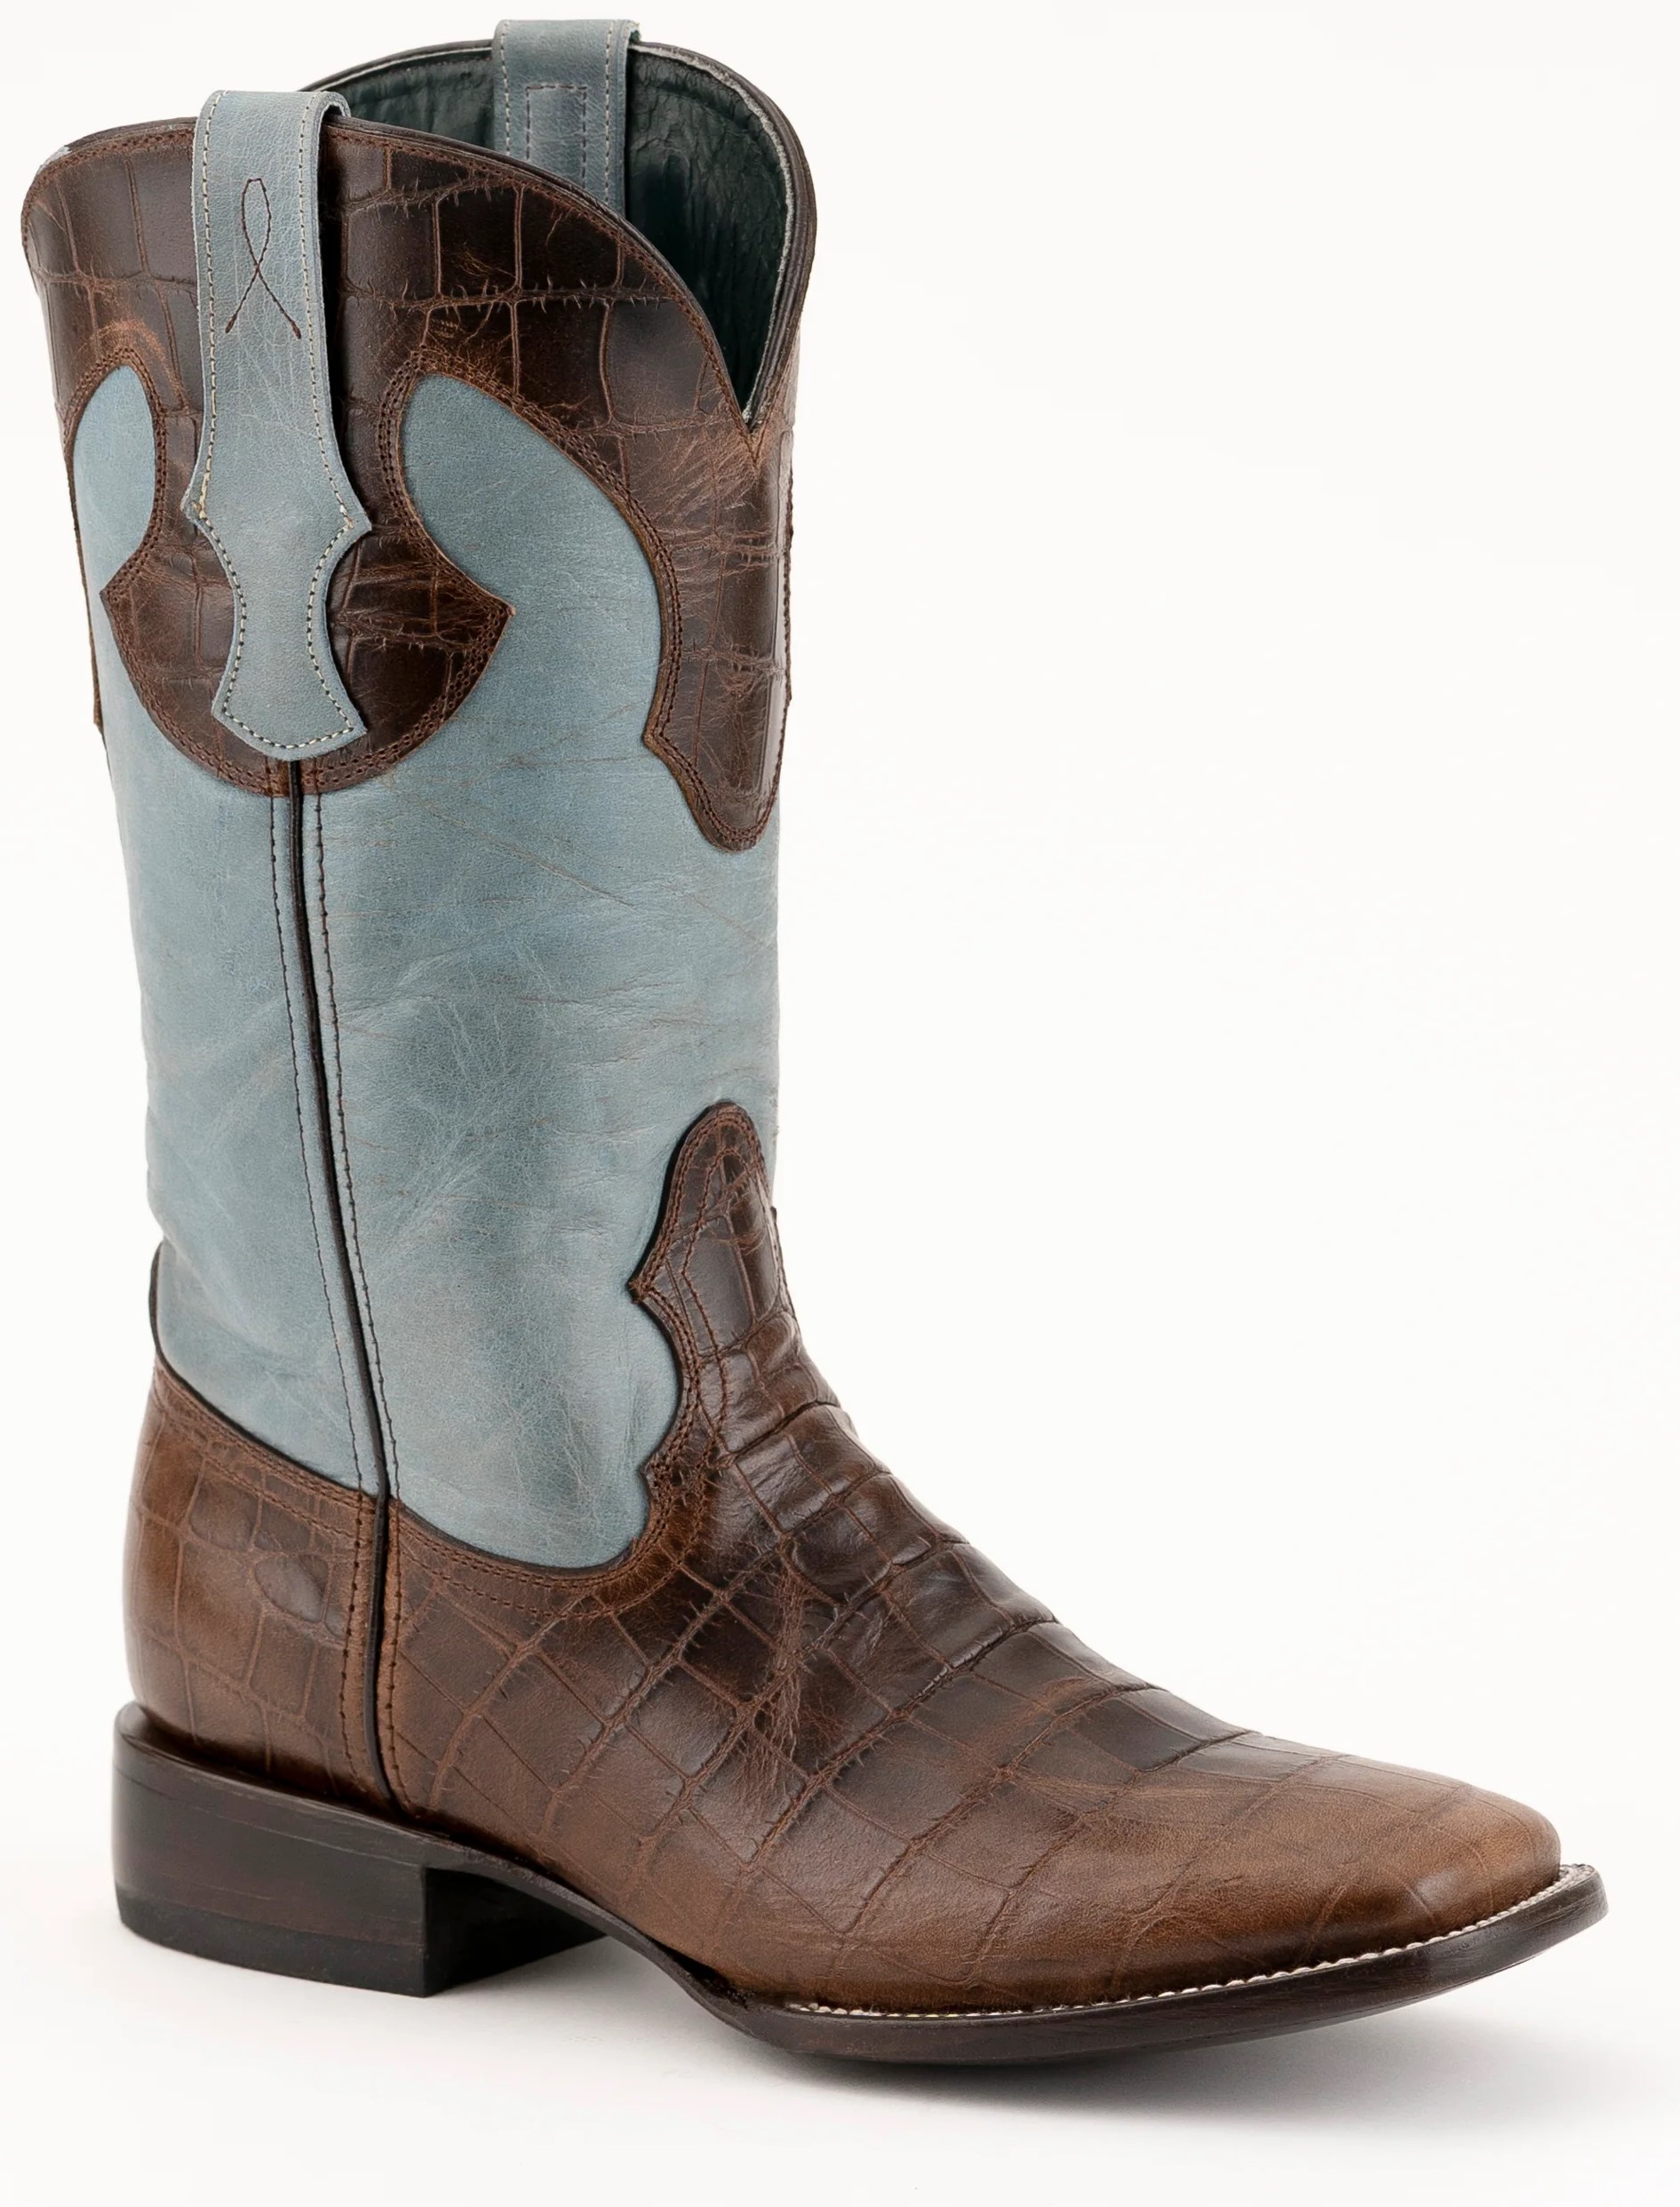 Ferrini "Mustang" Brown Alligator Belly Print Leather Square Toe Cowboy Boots 40793-10